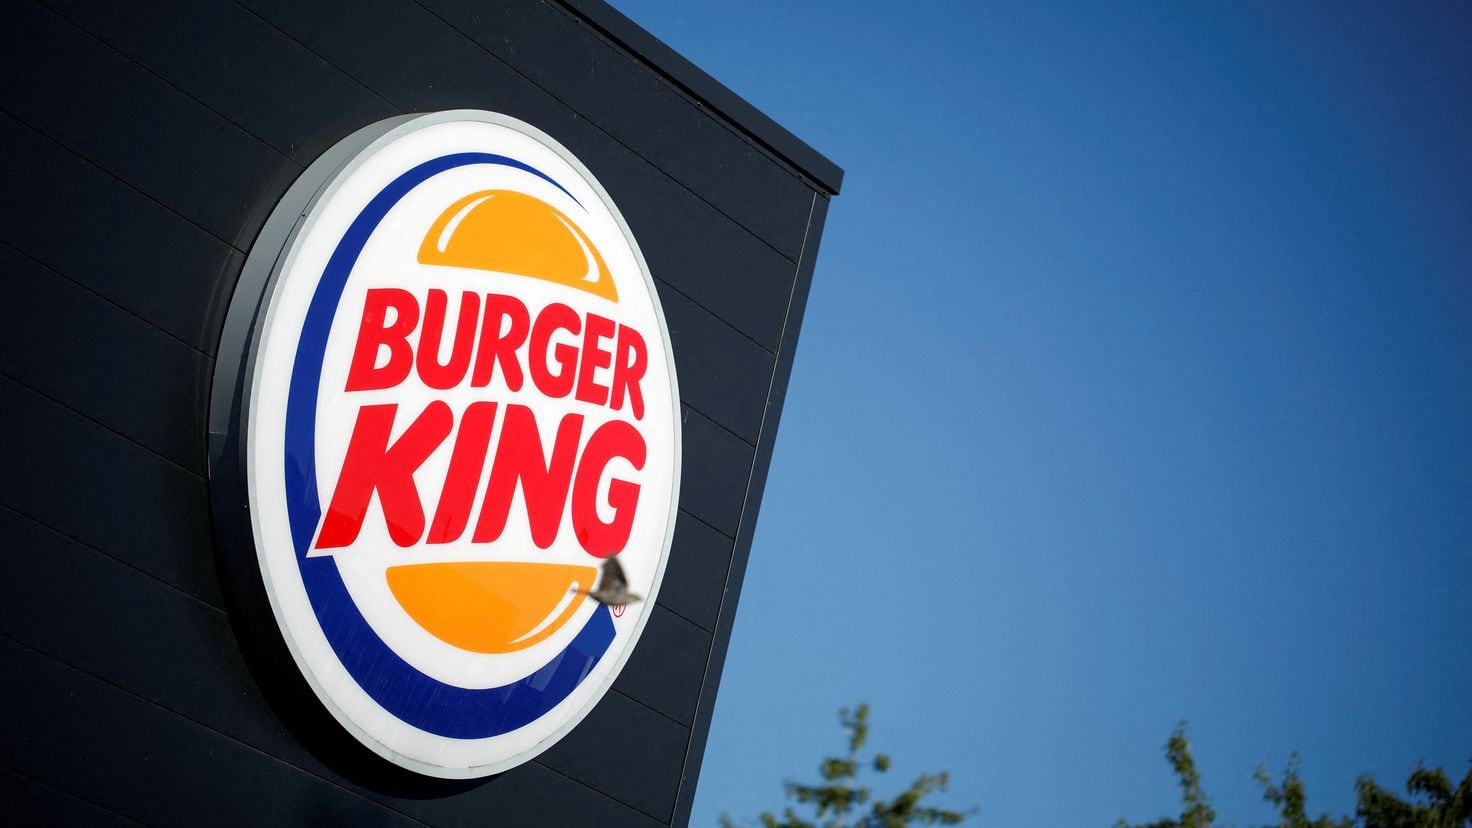 Burger King restaurant closings: The fast-food chain is on its way to close up to 400 locations in 2023